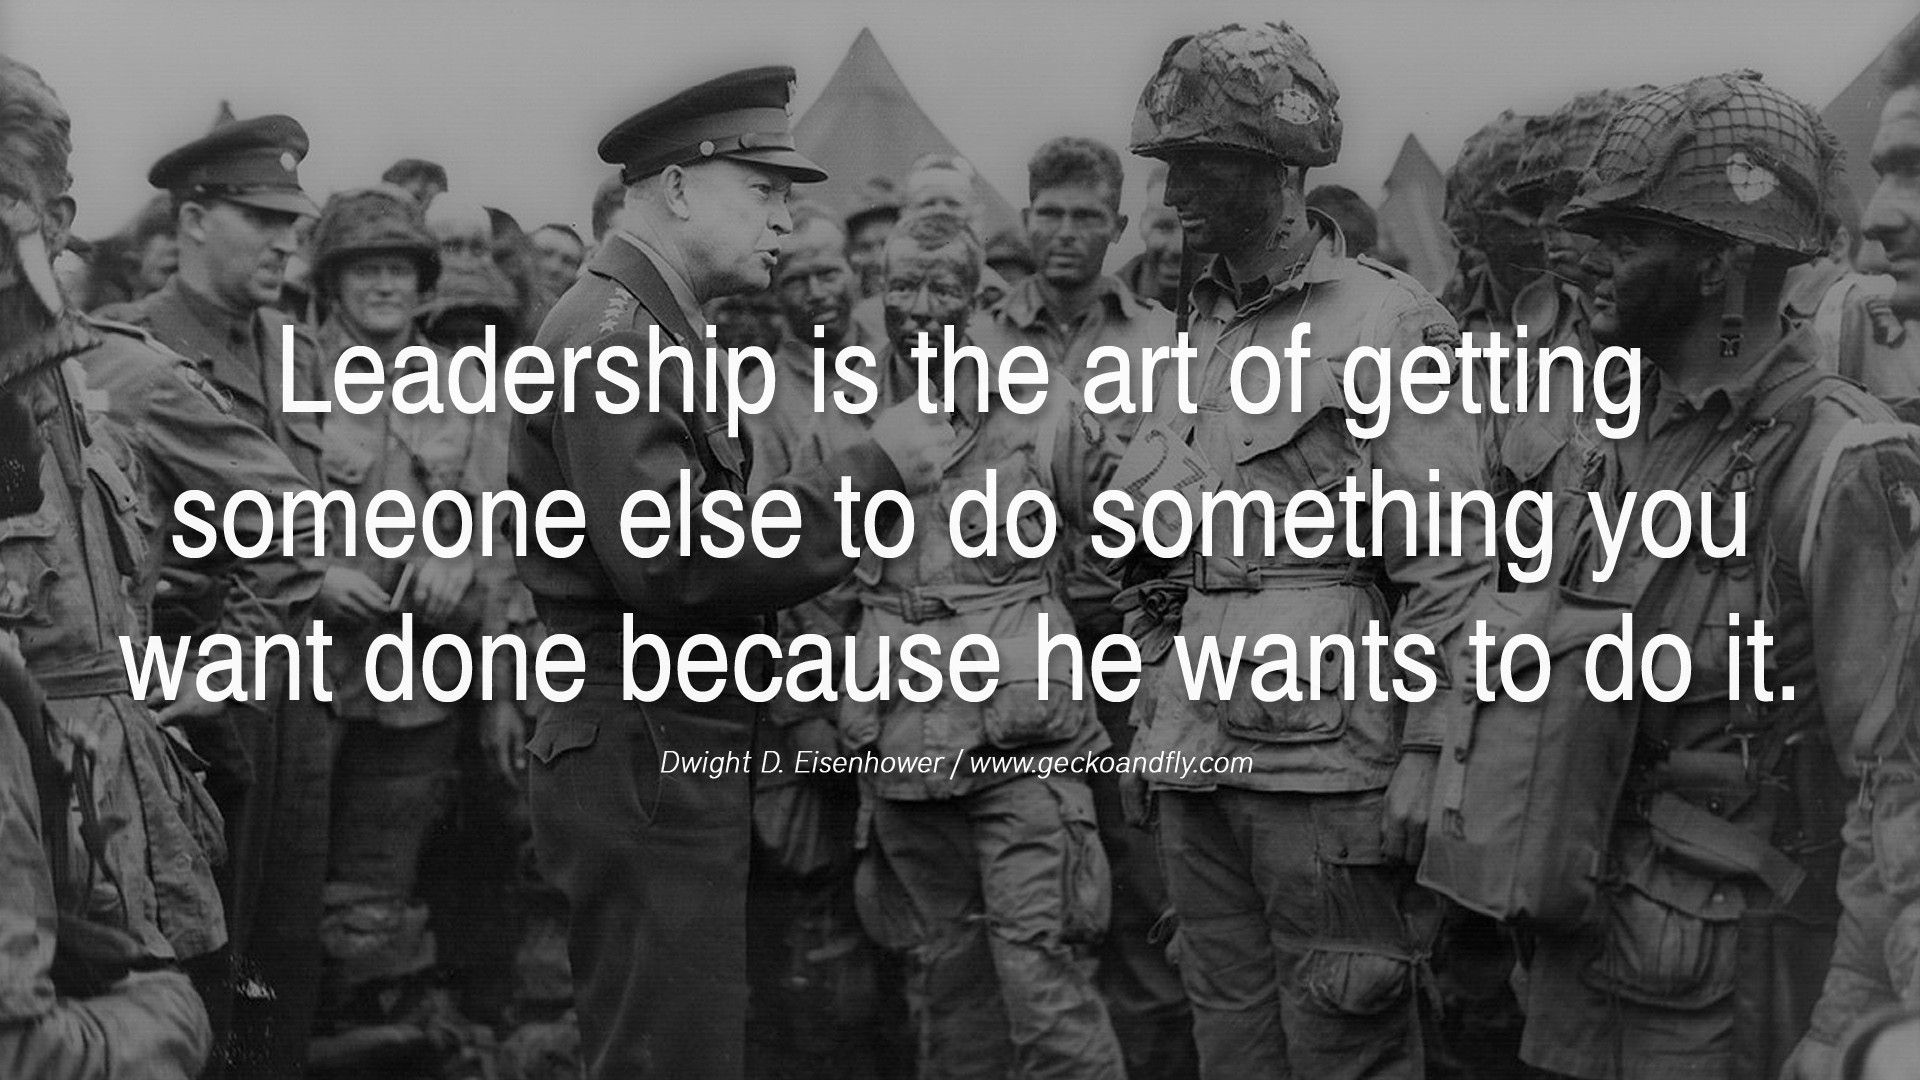 Navy Leadership Quotes
 Famous Navy Leadership Quotes QuotesGram